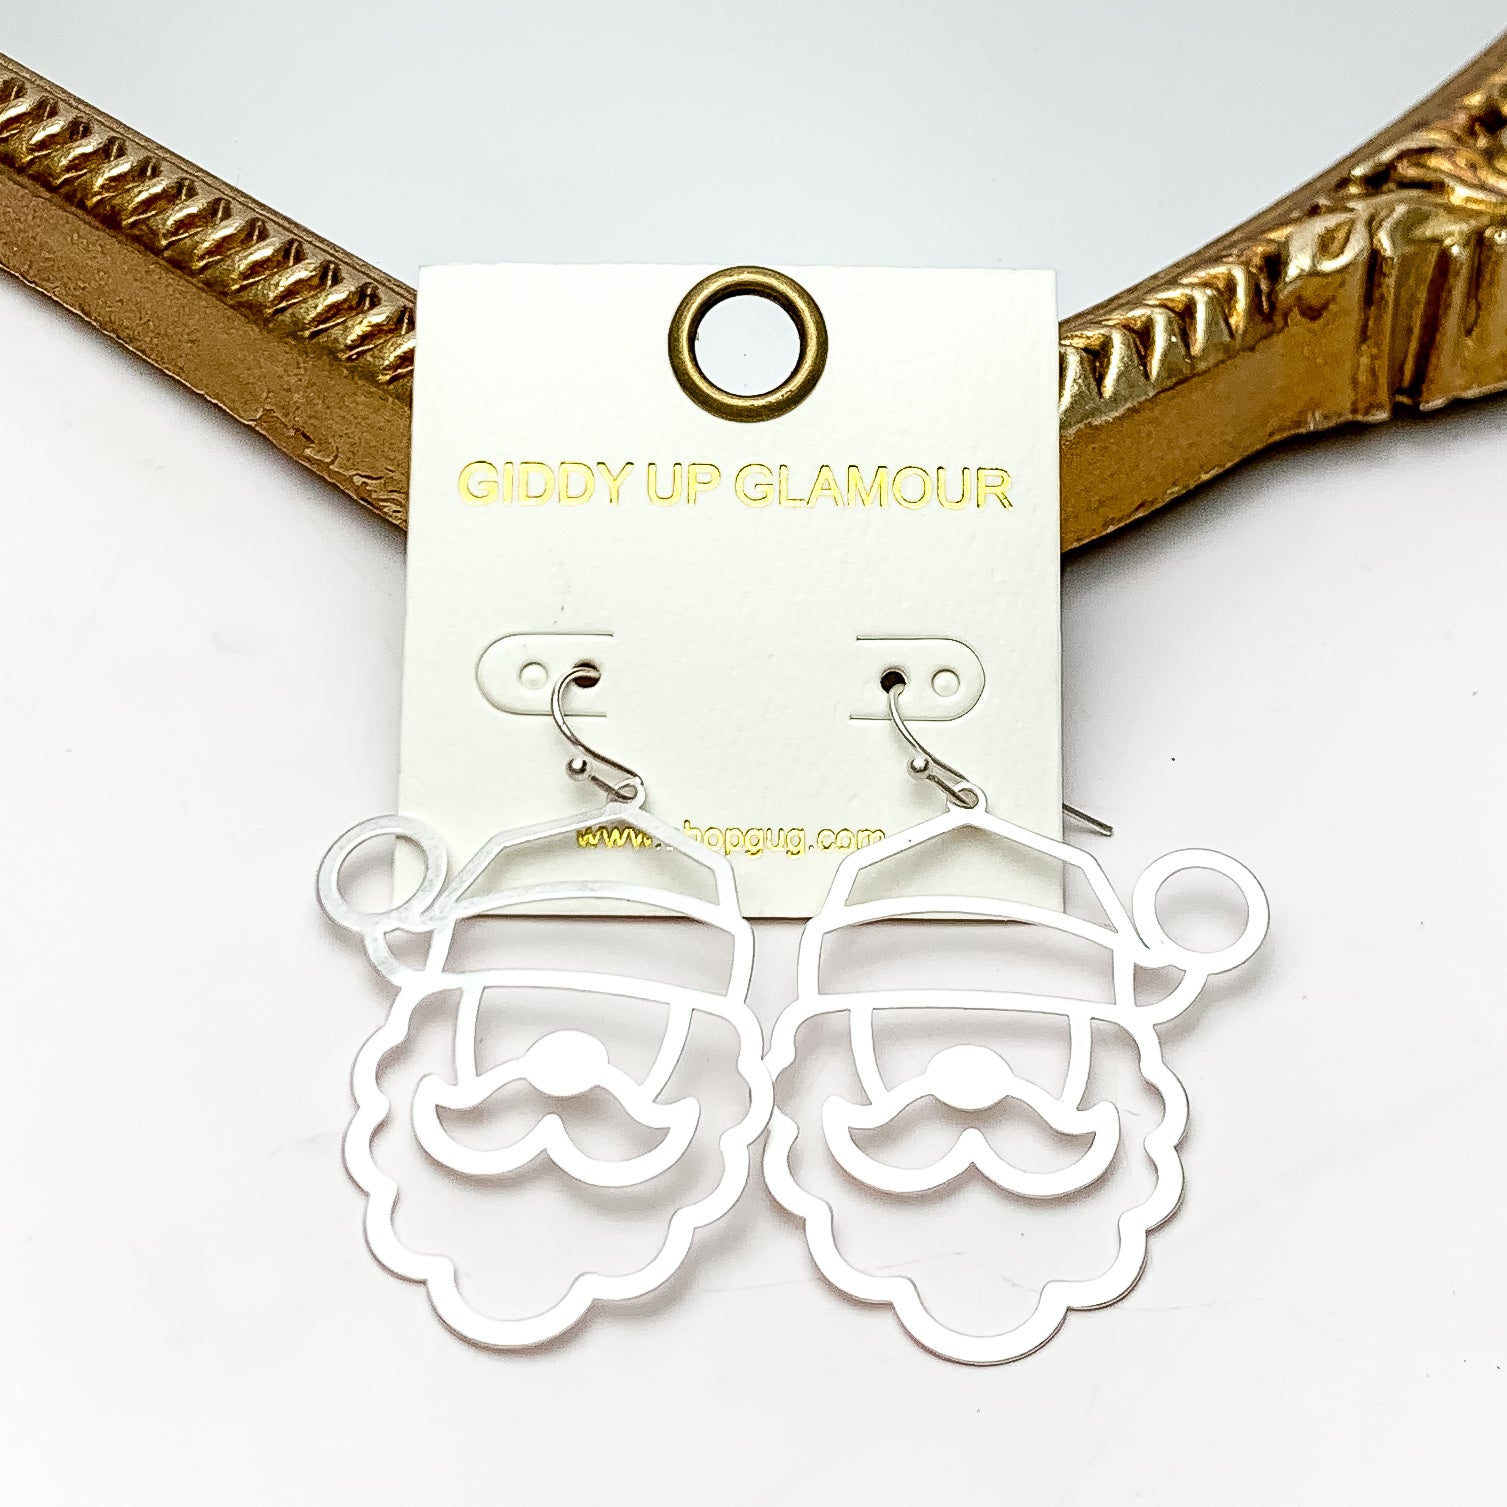 Santa Outline Earrings in Silver Tone. These earrings are pictured on a white background with a gold frame around.